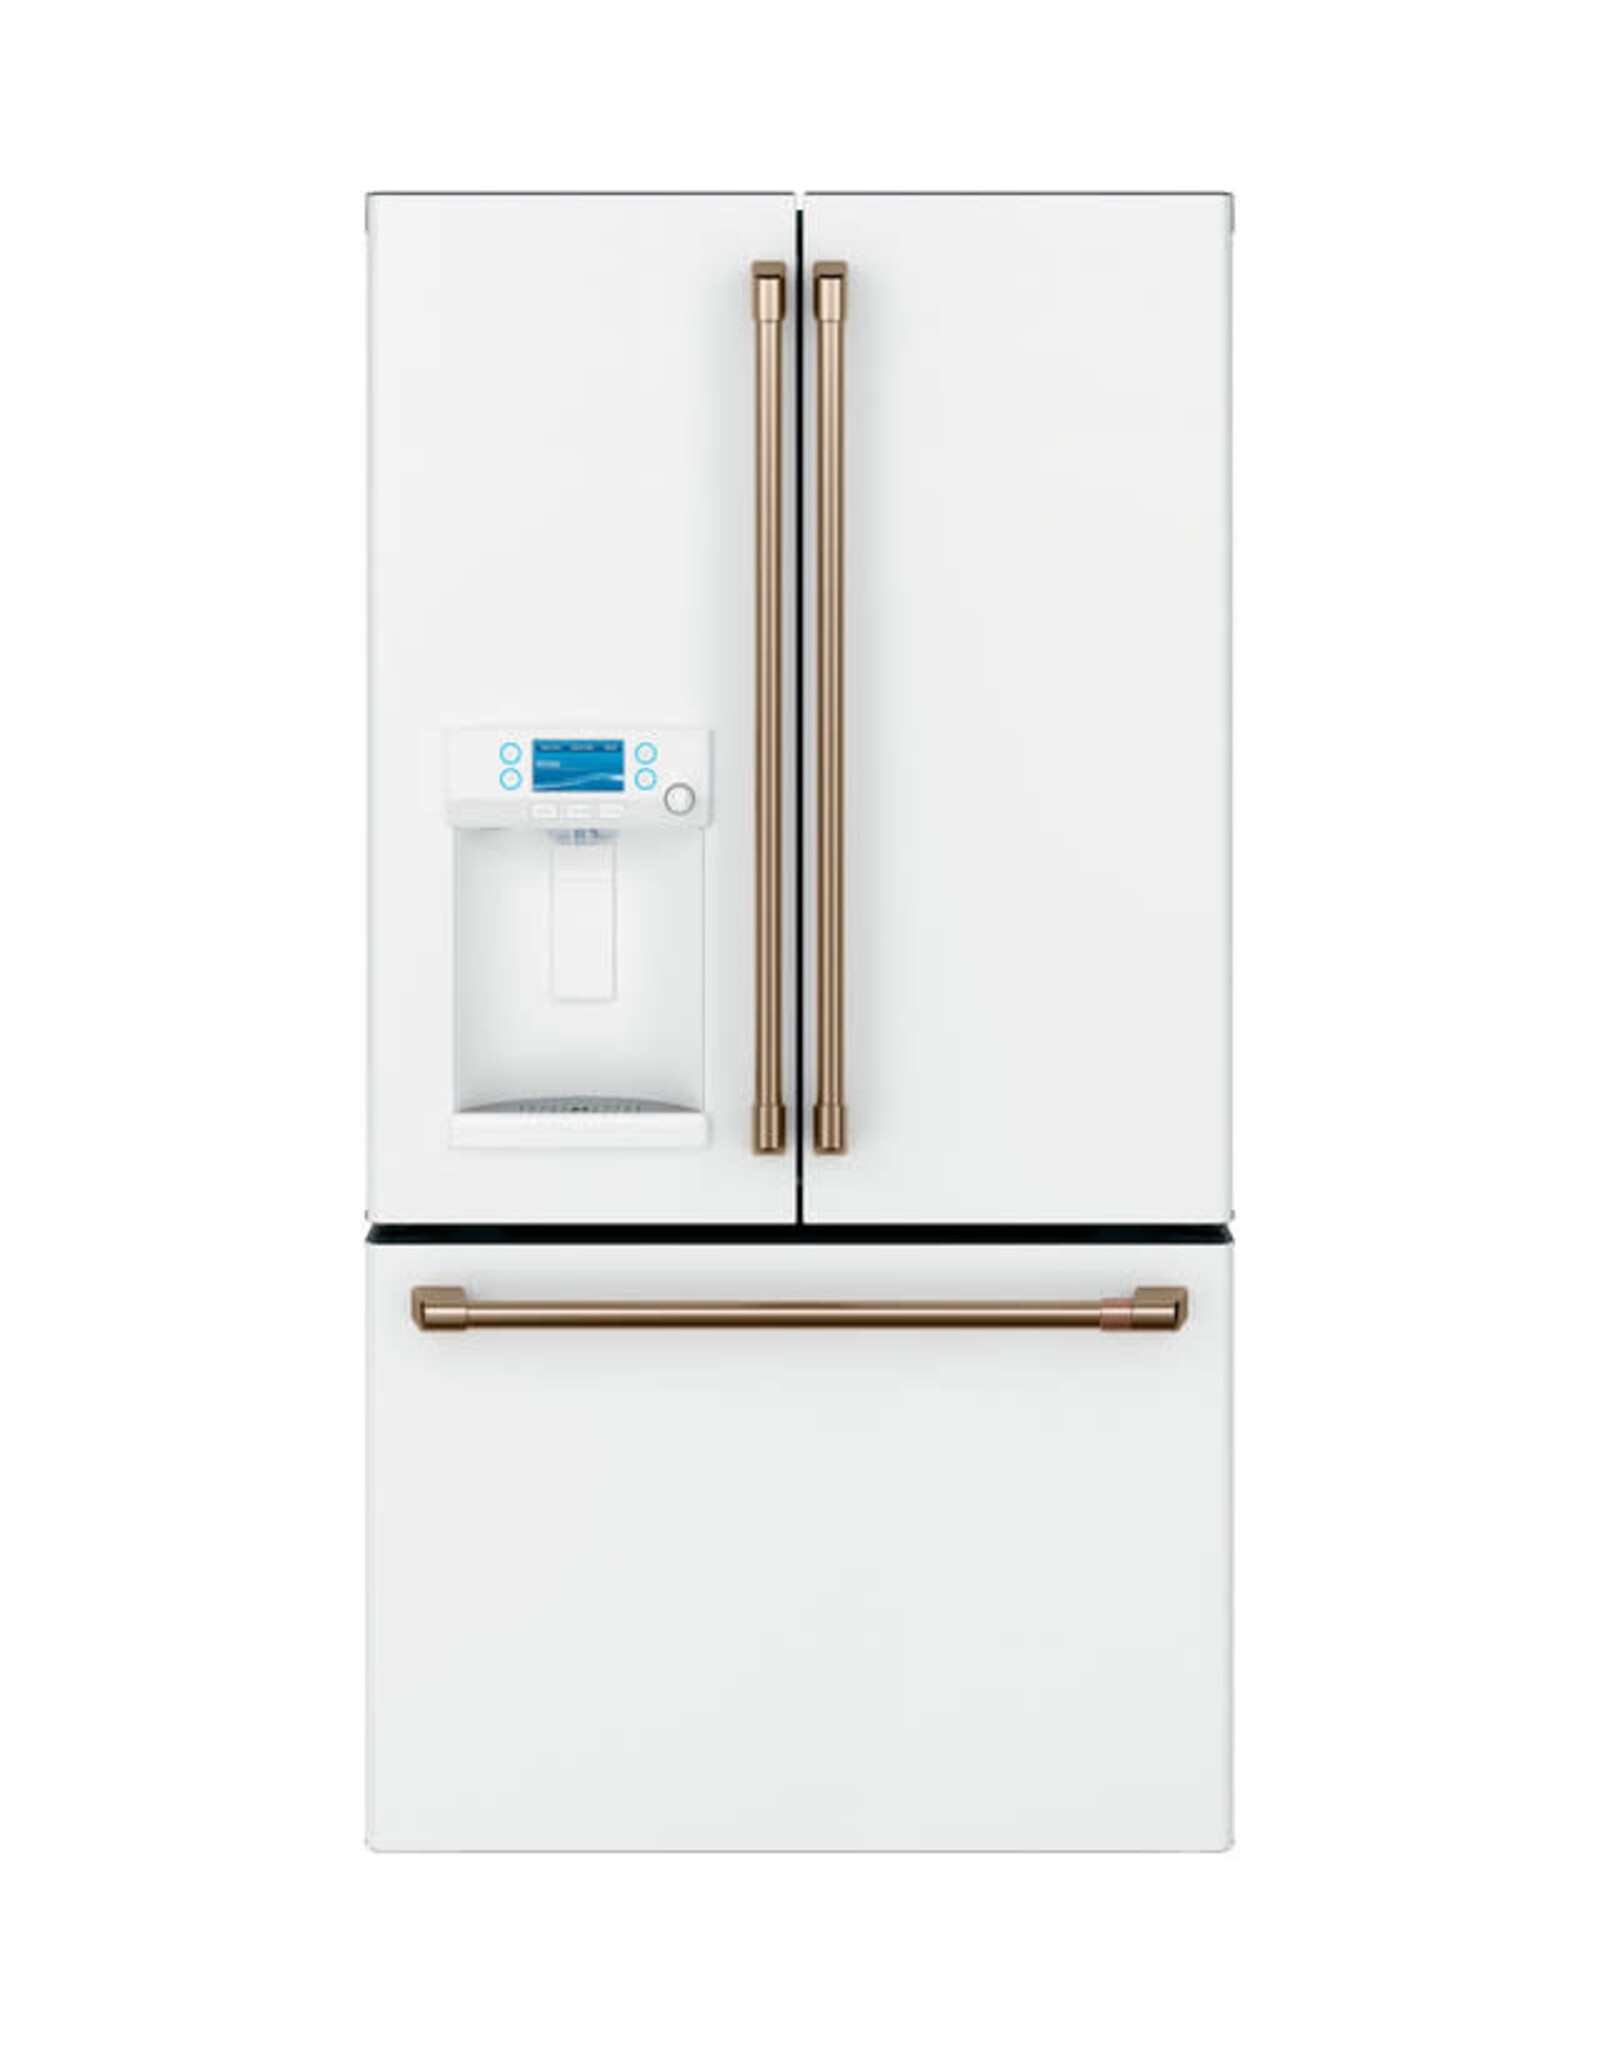 GE Cafe' CYE22TP4MW2 Café™ ENERGY STAR® 22.1 Cu. Ft. Smart Counter-Depth French-Door Refrigerator with Hot Water Dispenser